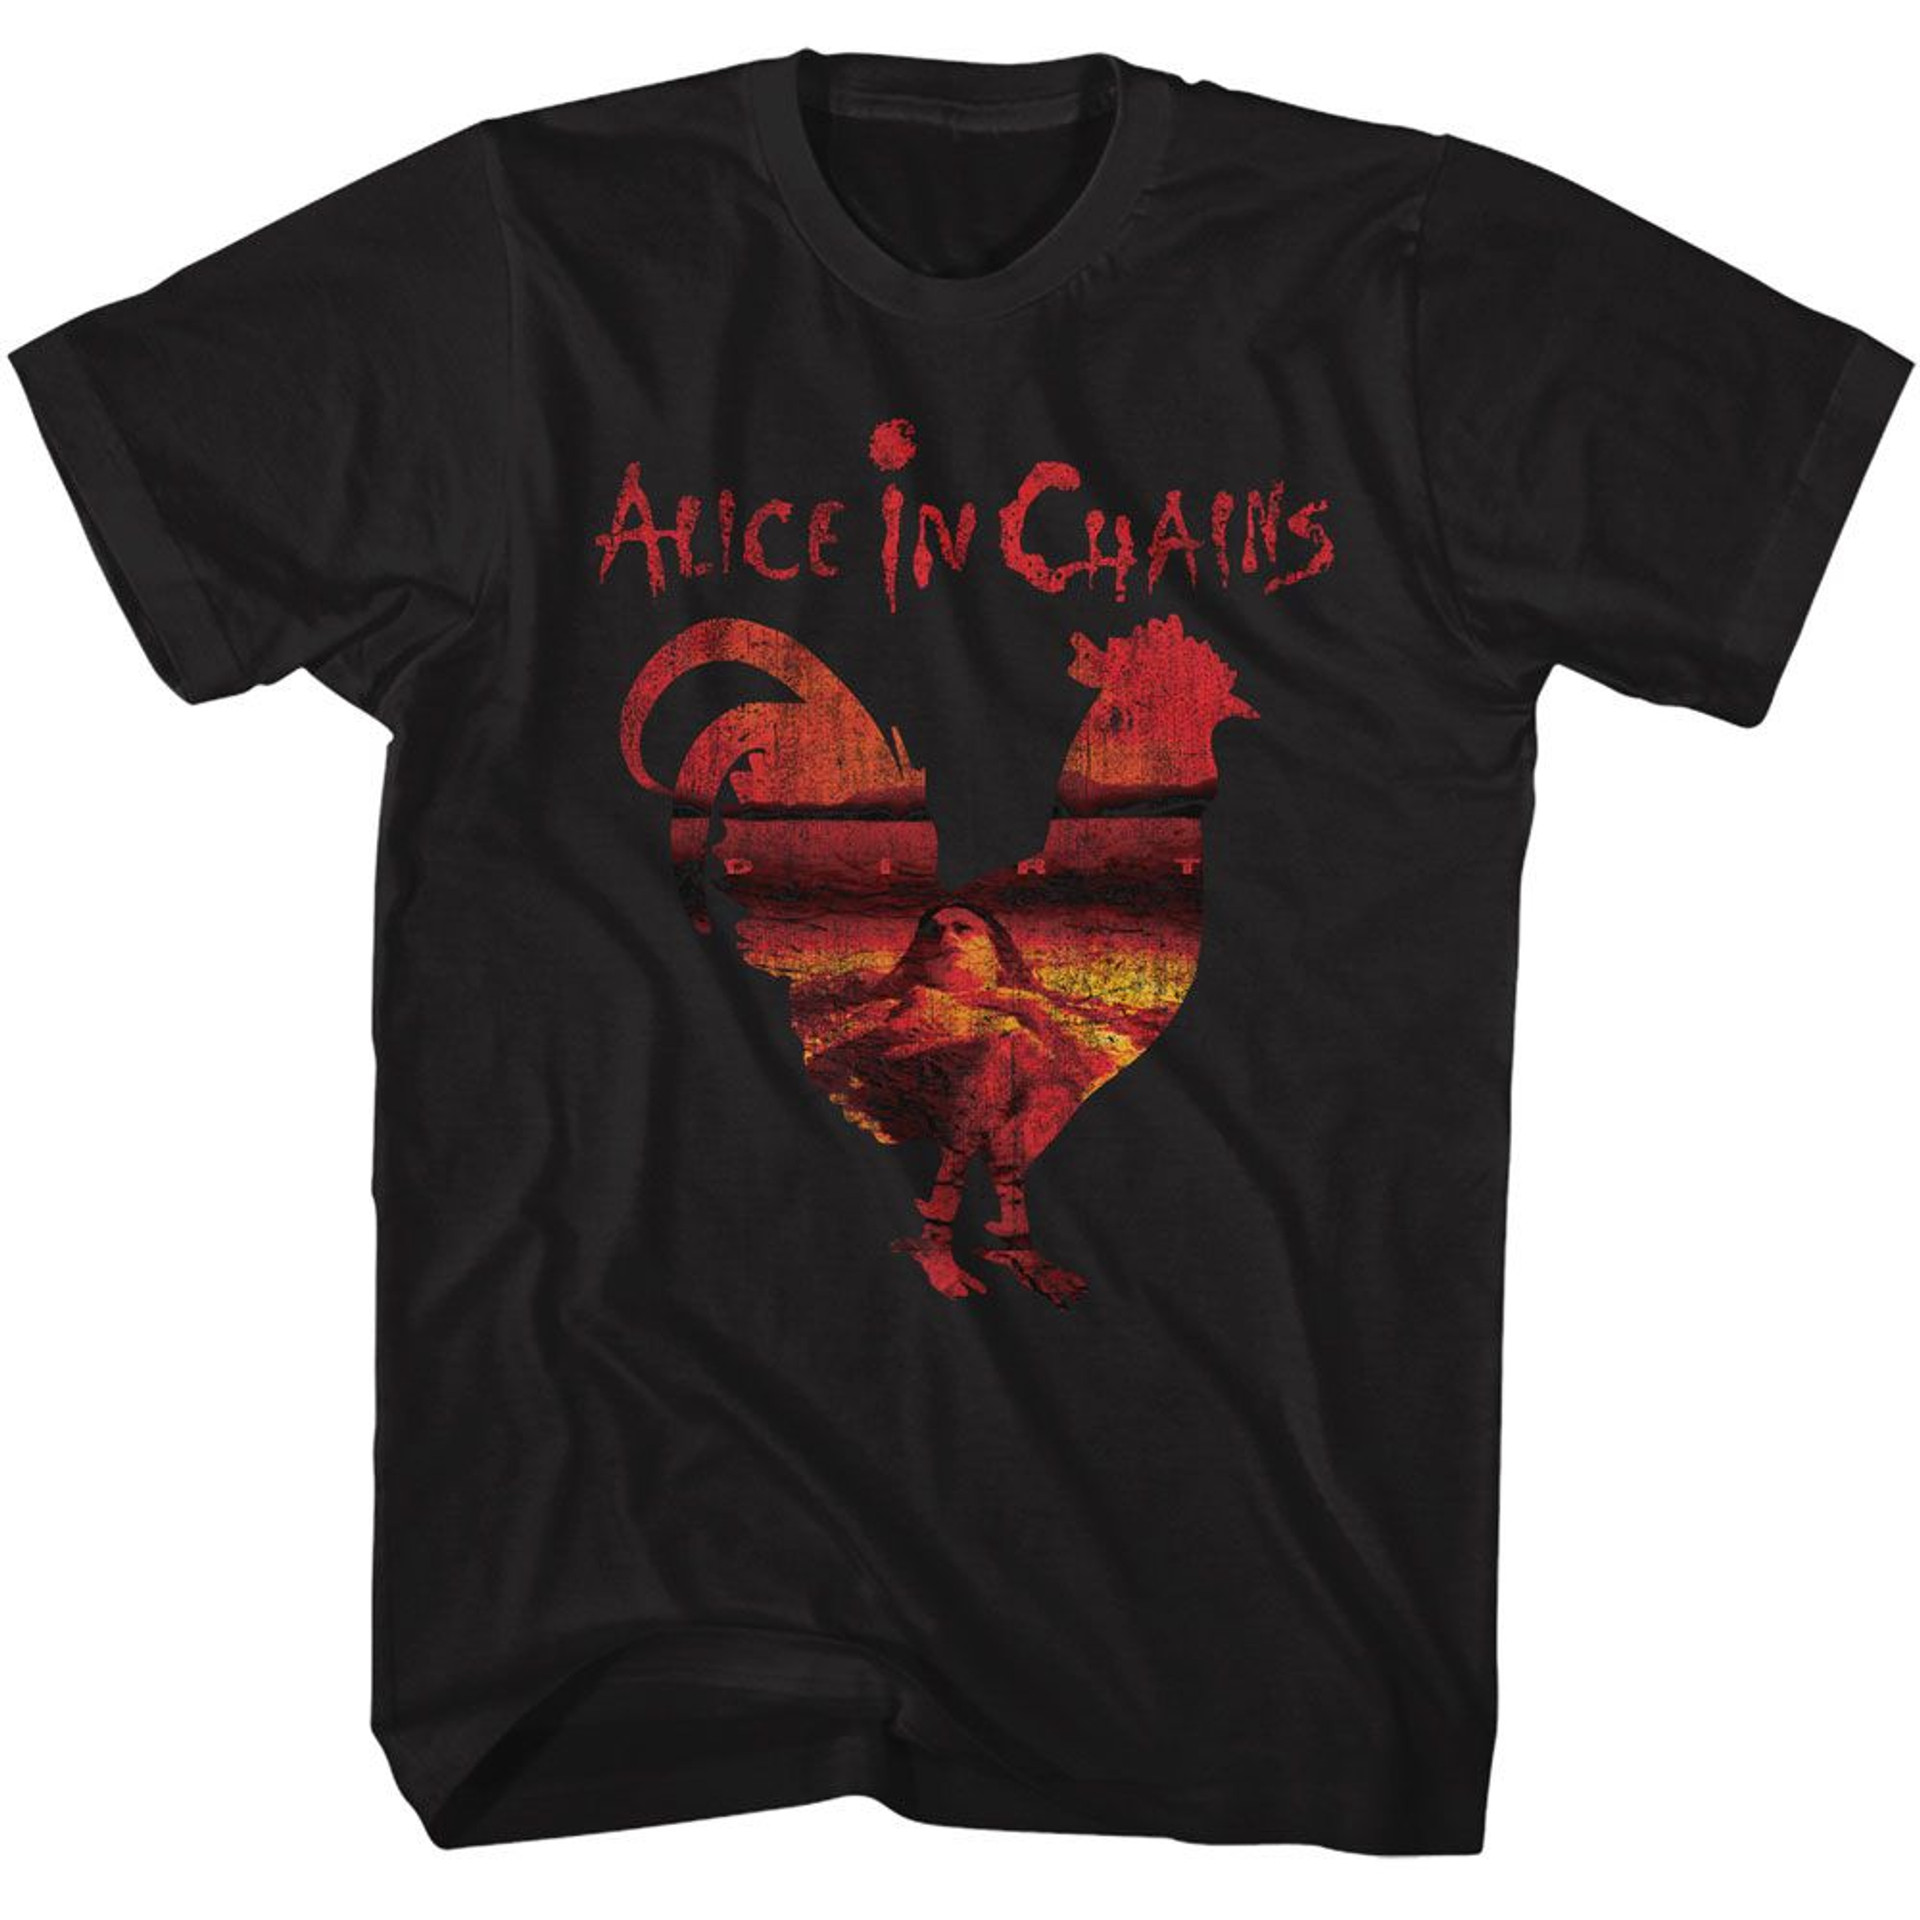 alice in chains dirt album rooster black t shirt 6220 f1jrj